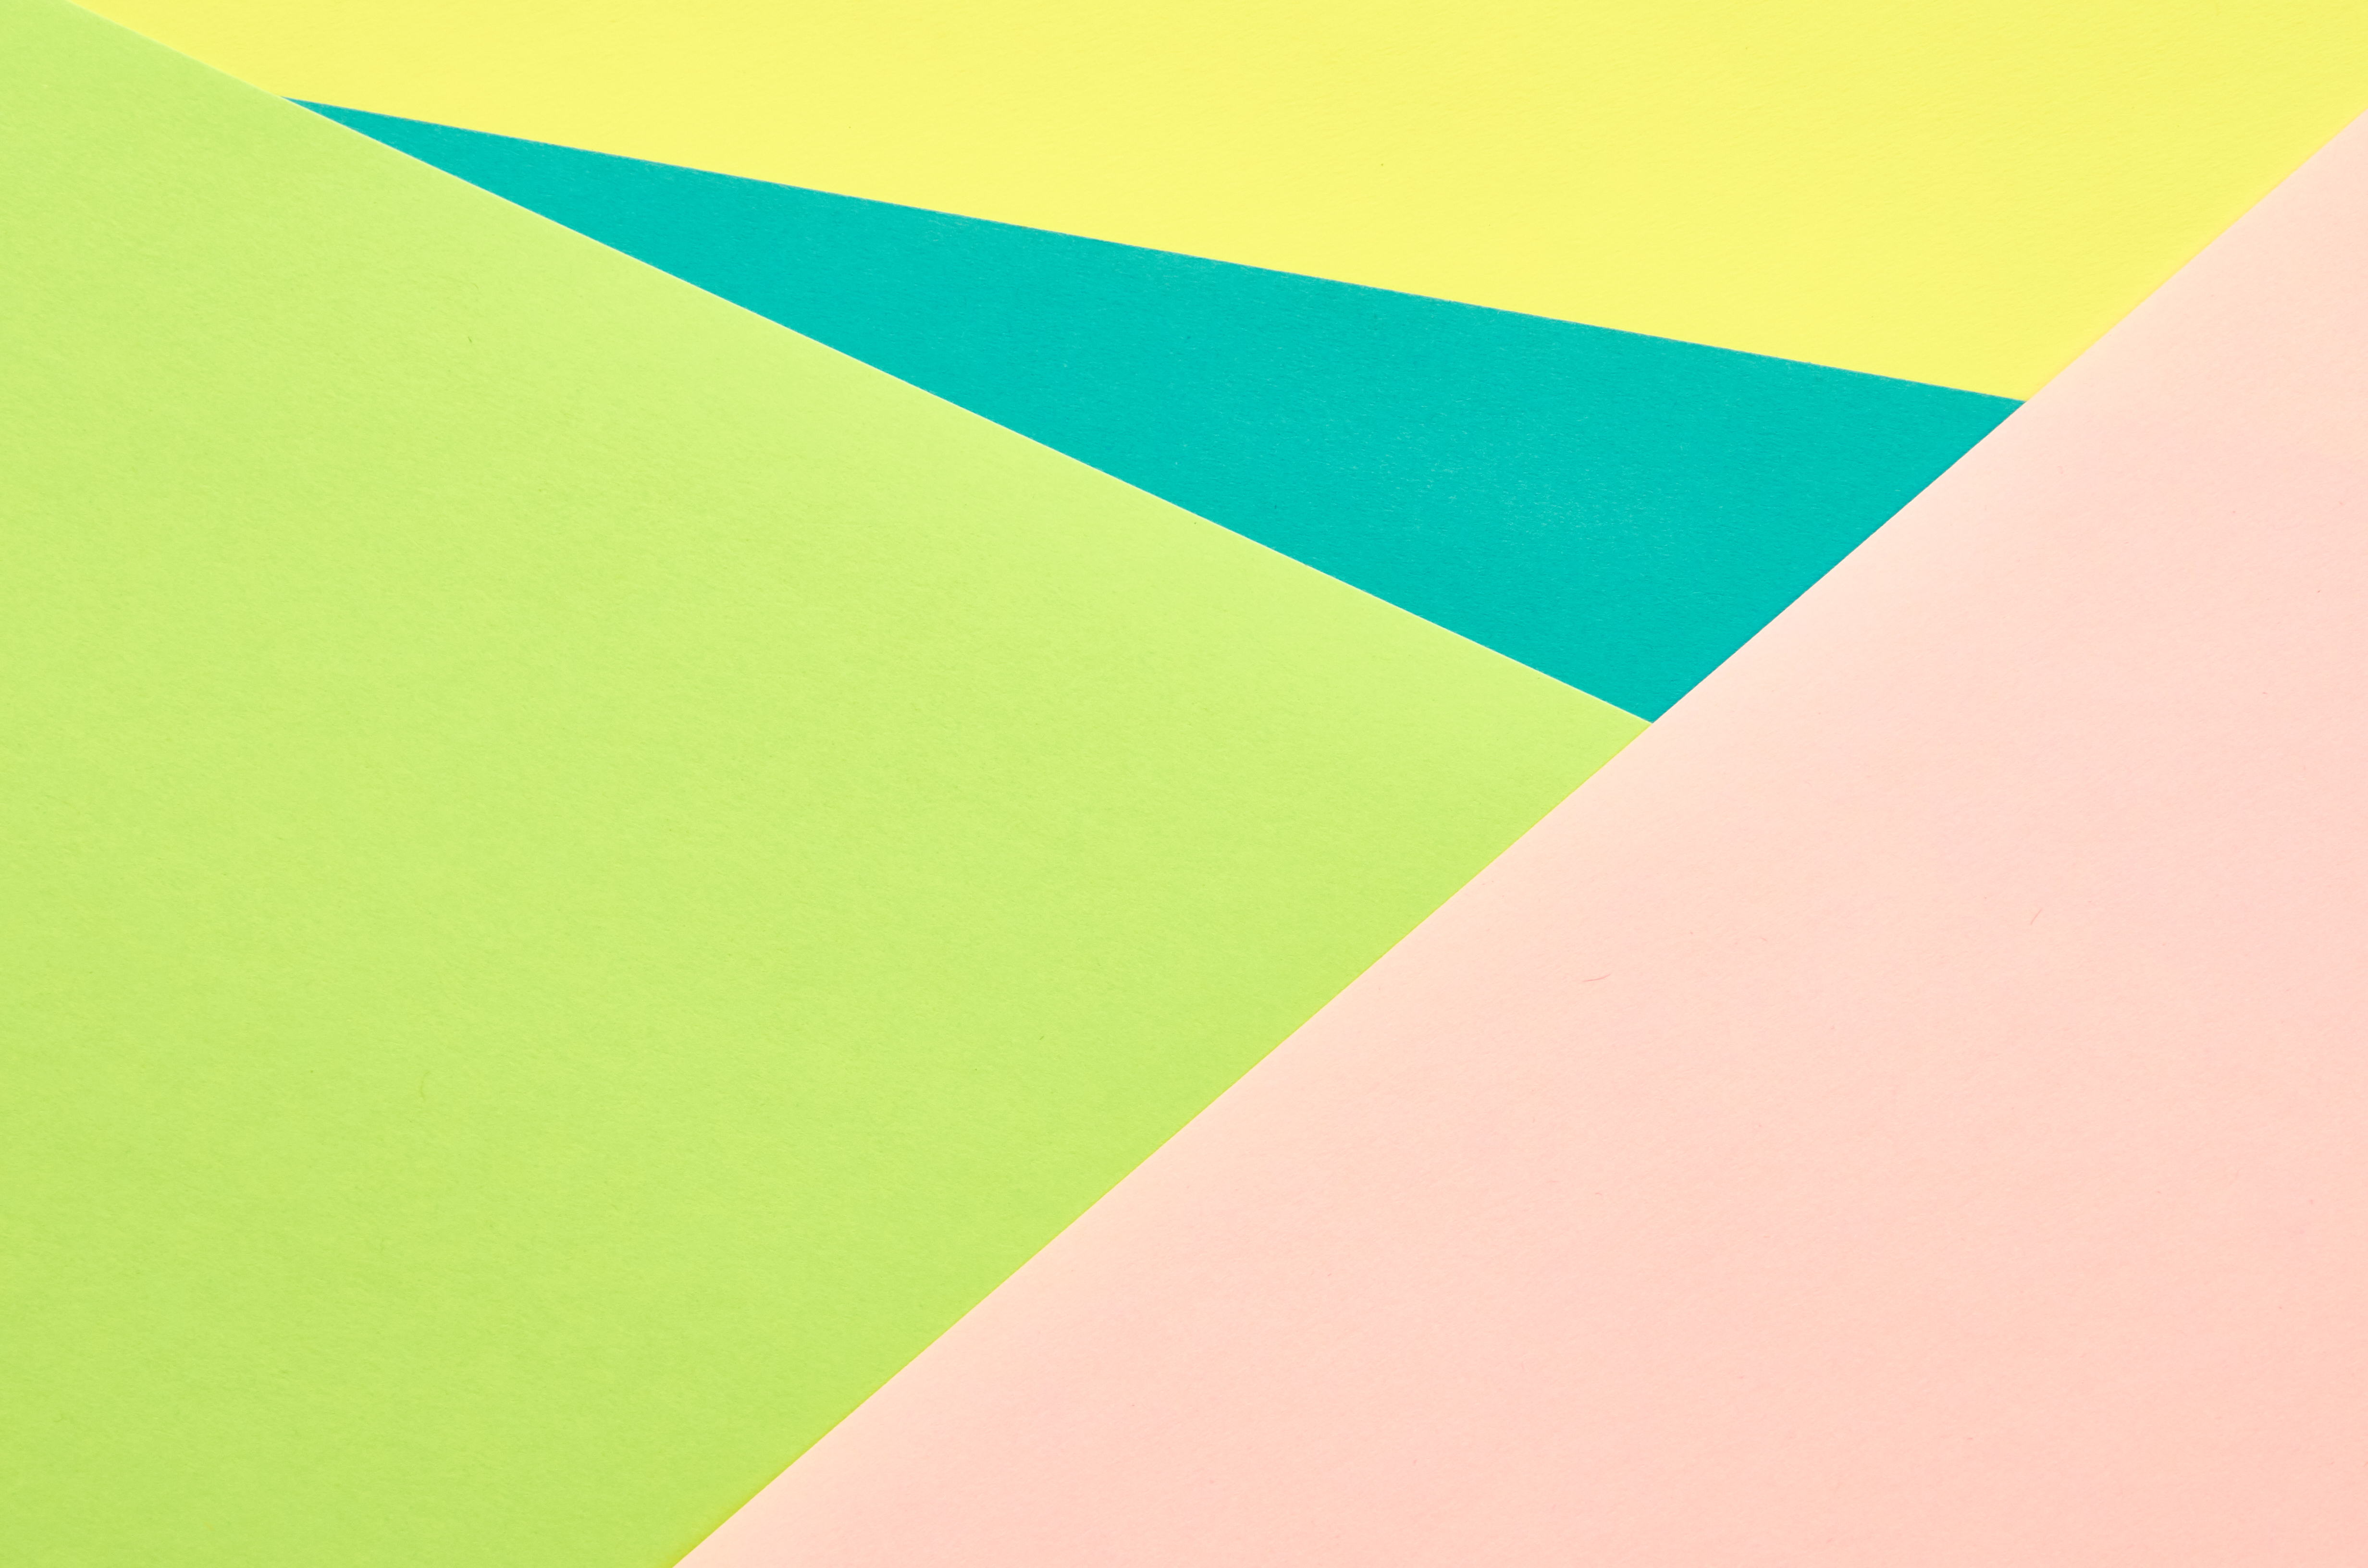 android motley, multicolored, abstract, shape, shapes, triangles, fragments